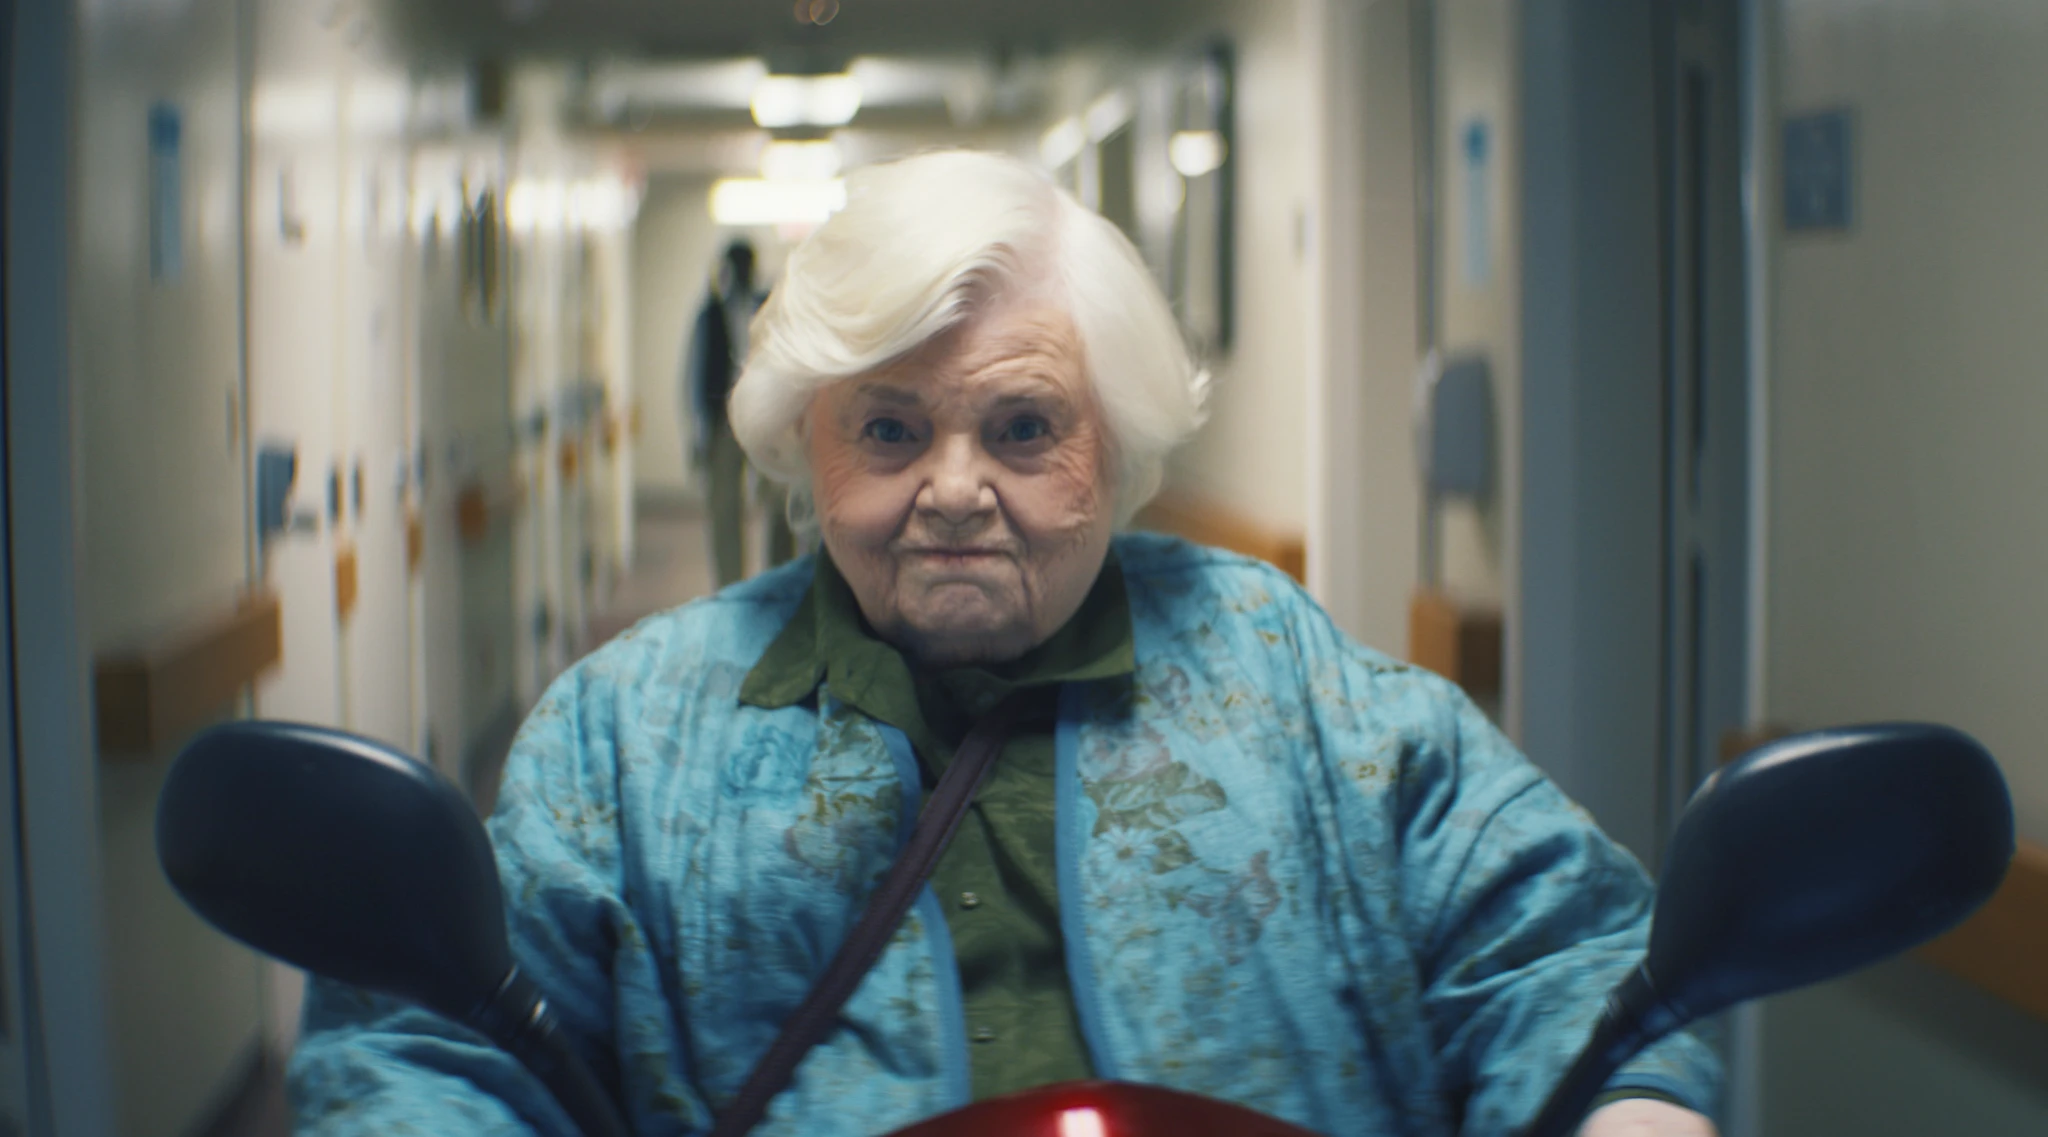 June Squibb Takes the Lead in Comedy Film Thelma at Age 94